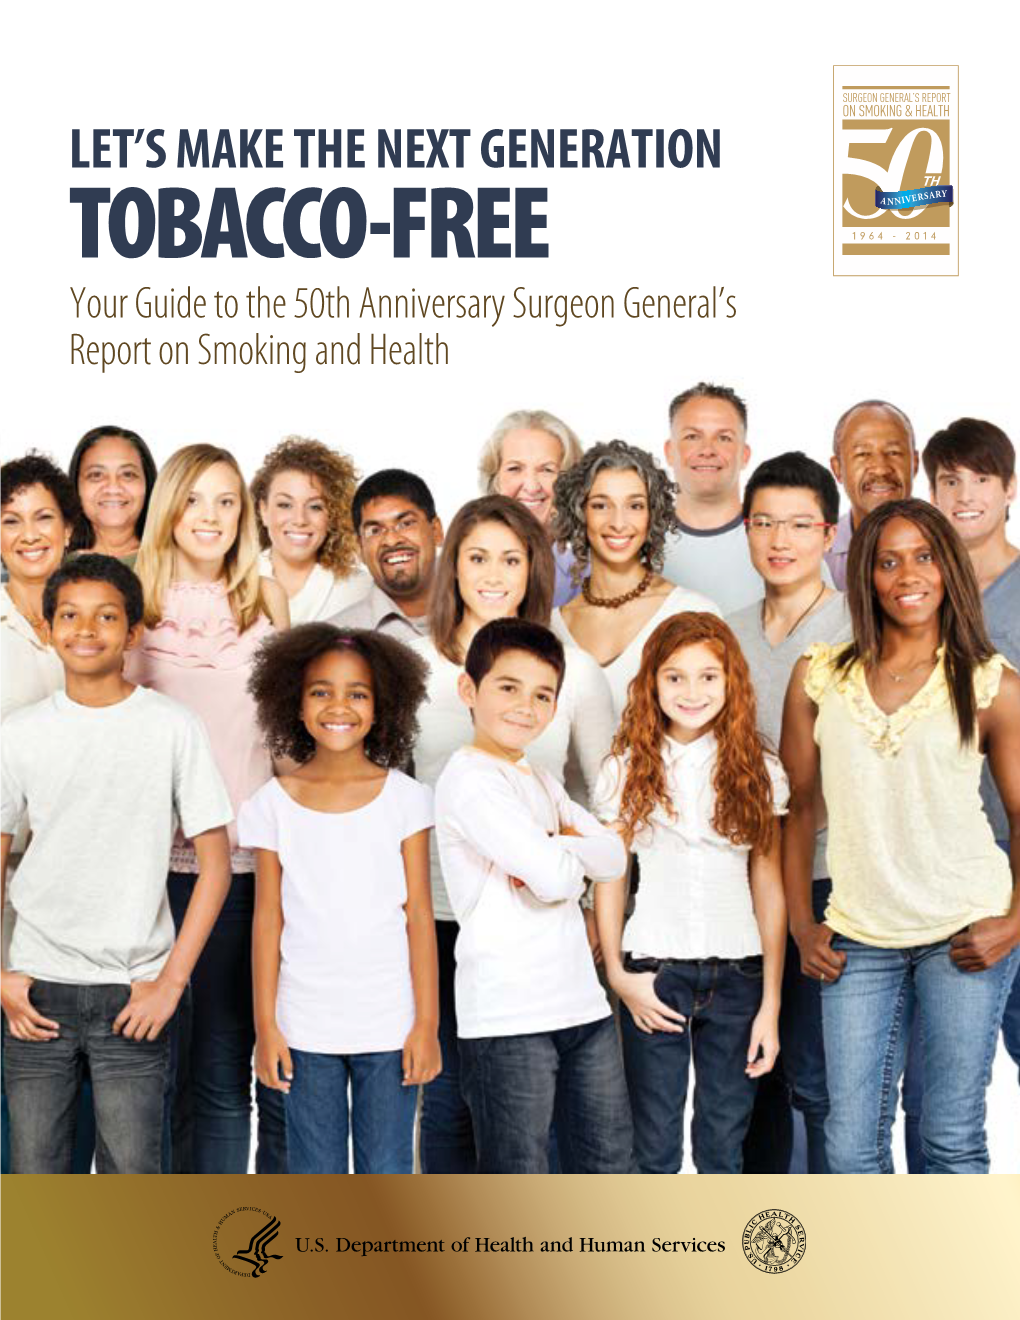 Let's Make the Next Generation Tobacco-Free: Your Guide to The